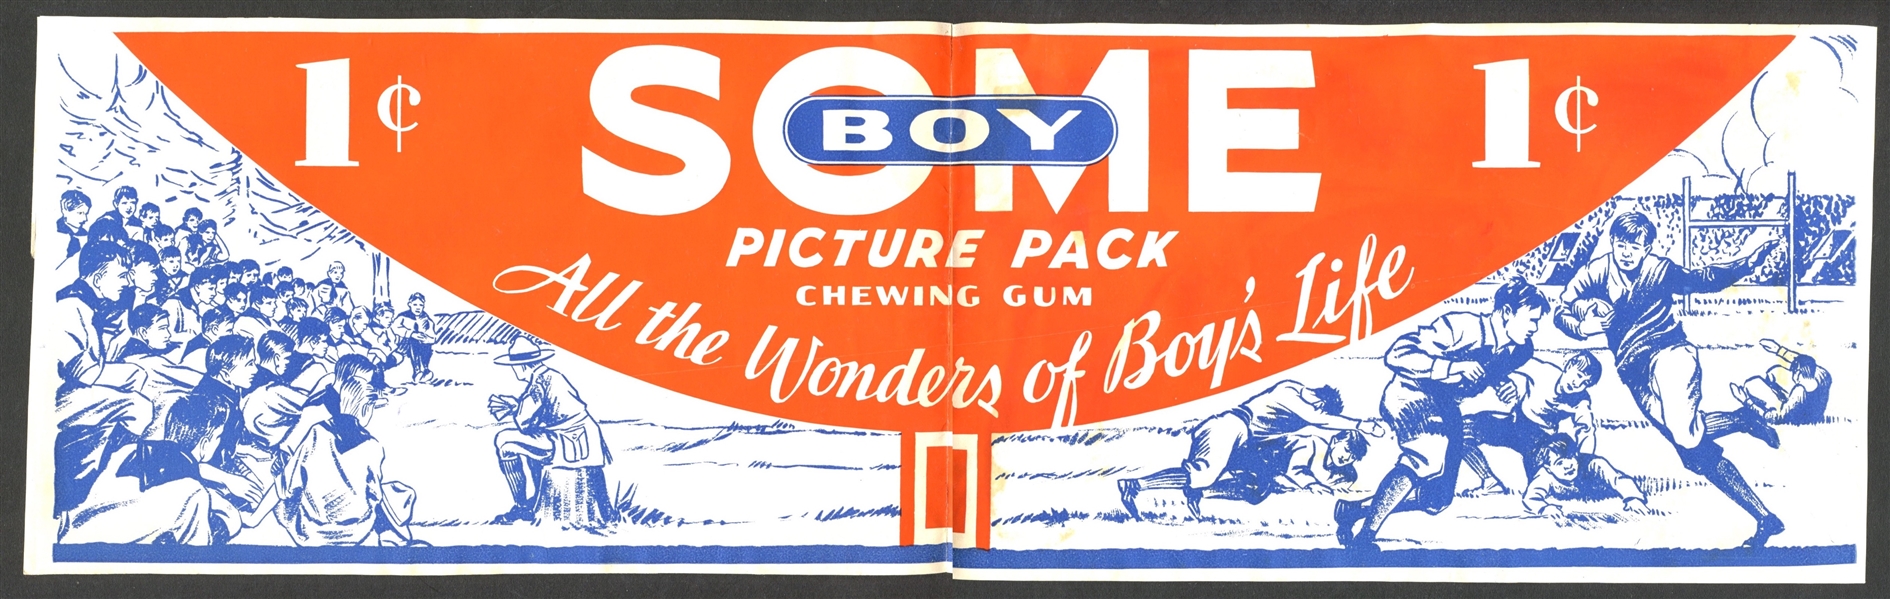 Incredible Goudey Some Boy Gum Salesman's Booklet Promotional Material